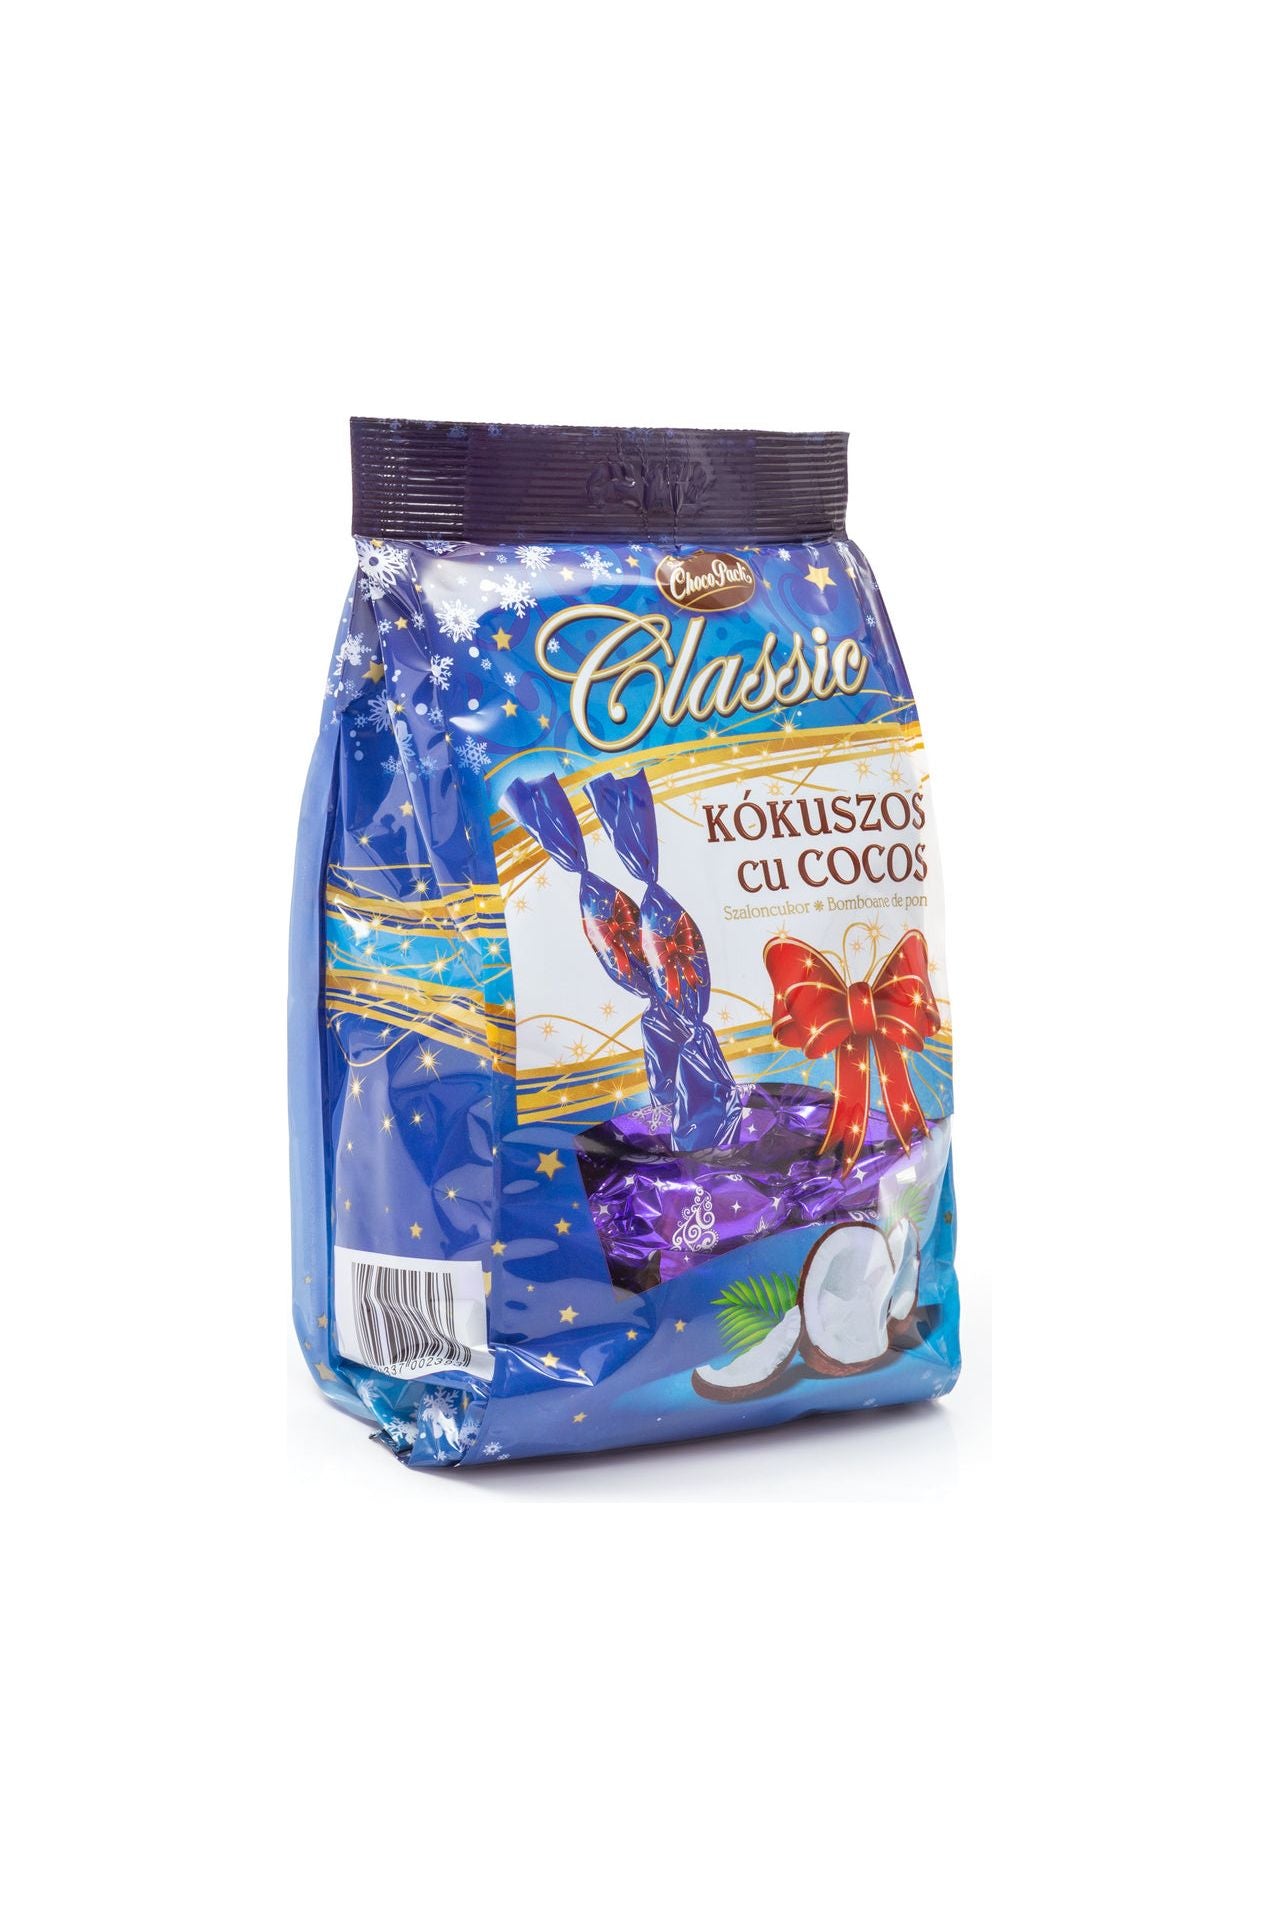 Classic Romanian Candies with Coconut - ChocoPack - 350g